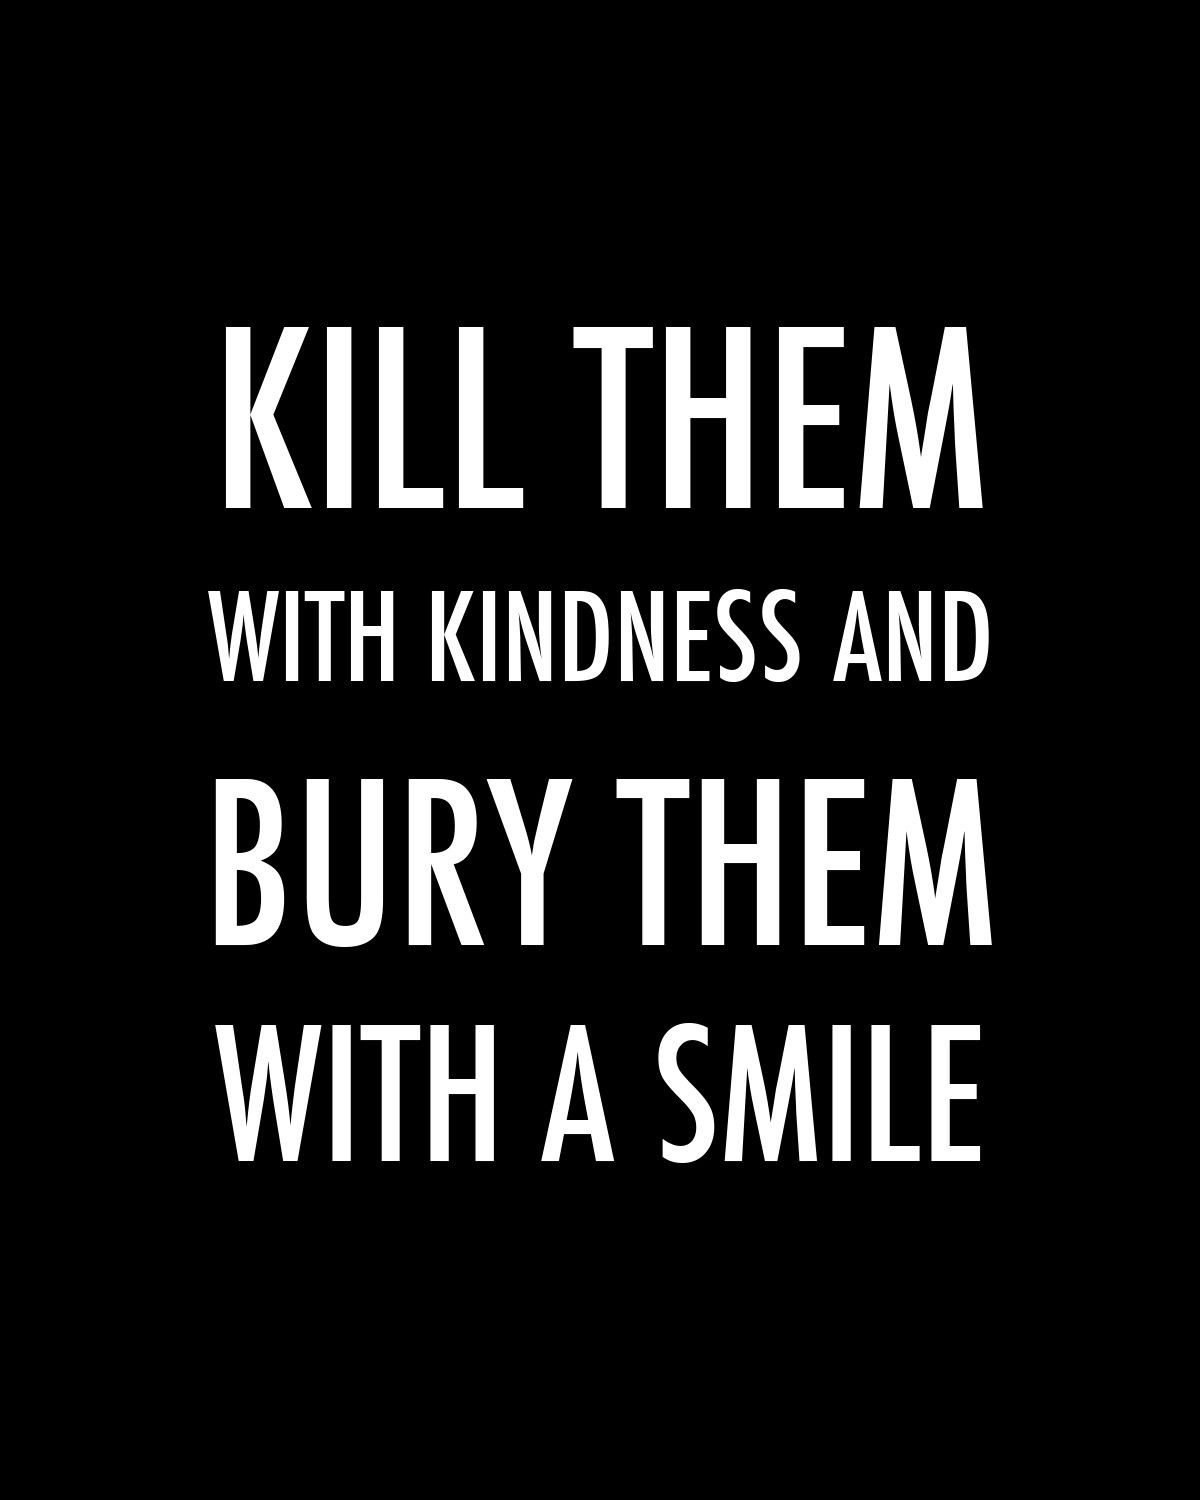 Killing Them With Kindness Quotes
 "Kill them with kindness and bury them with a smile "